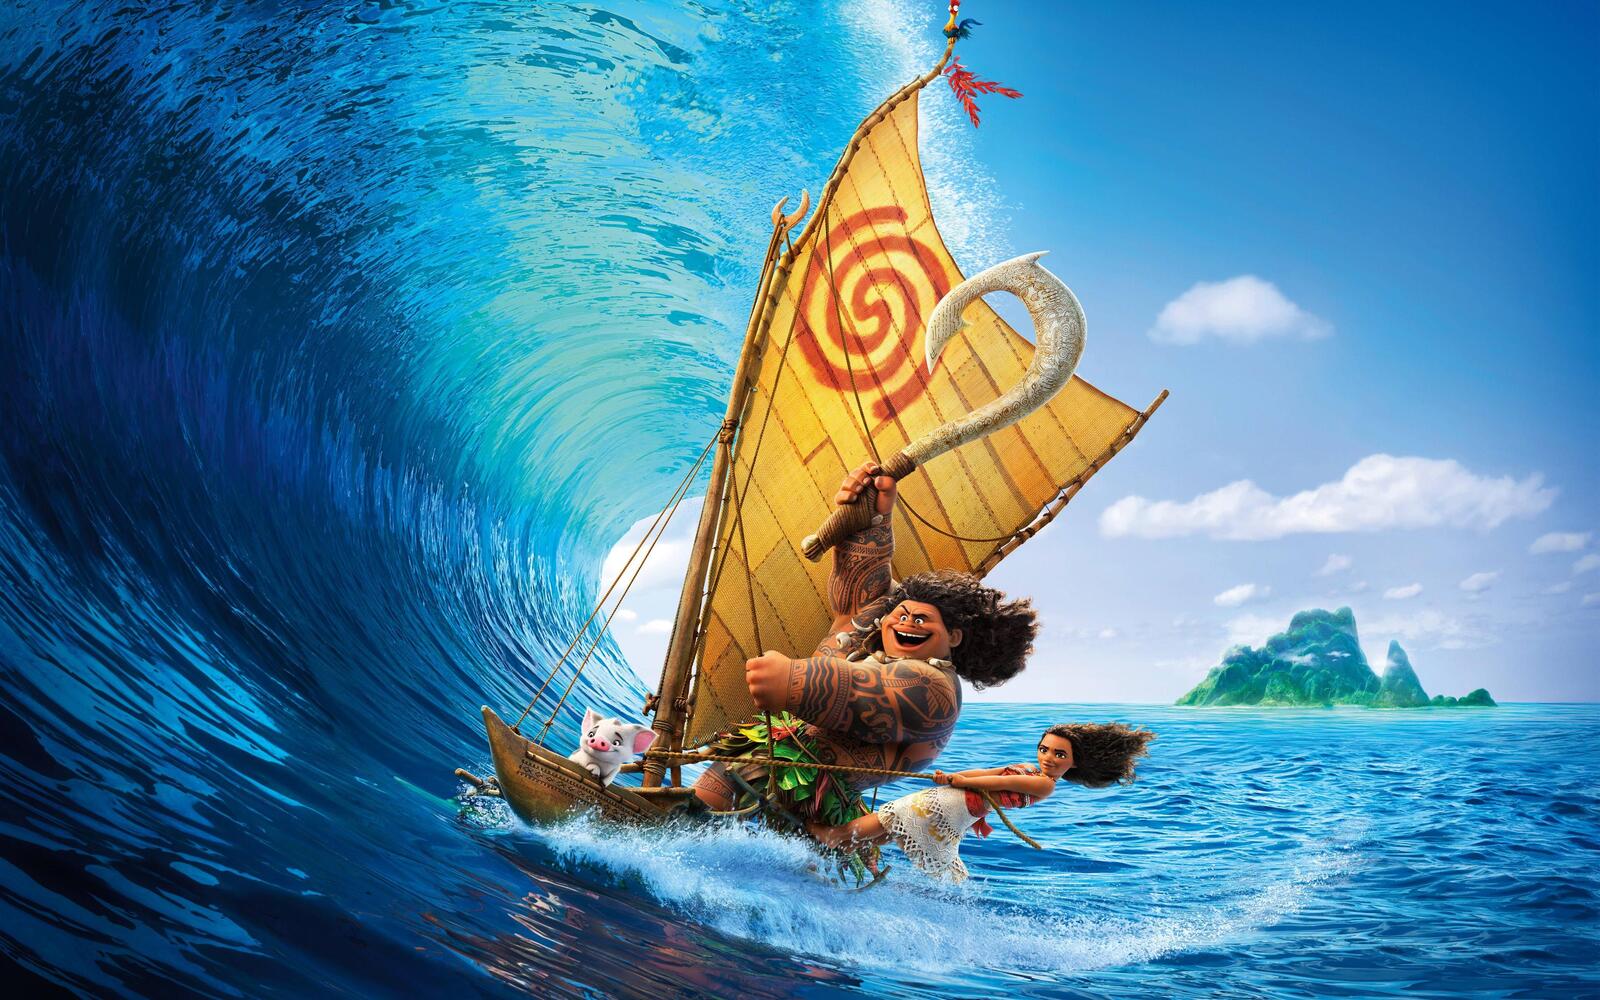 Wallpapers moana movies 2016 movies on the desktop